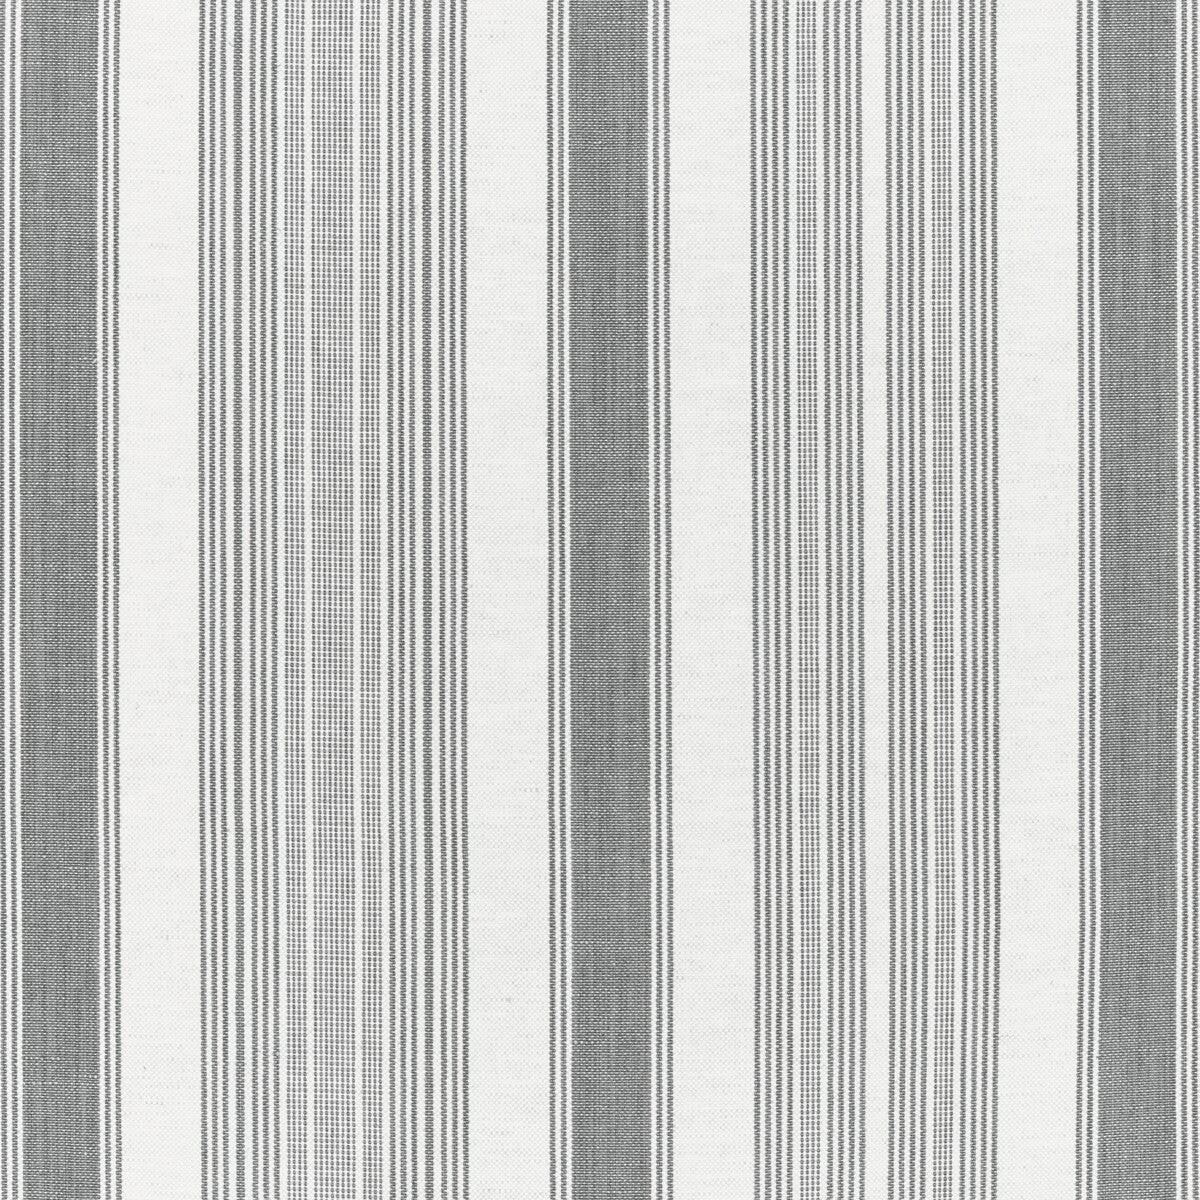 Tablada Stripe fabric in smoke color - pattern 2021102.1101.0 - by Lee Jofa in the Triana Weaves collection